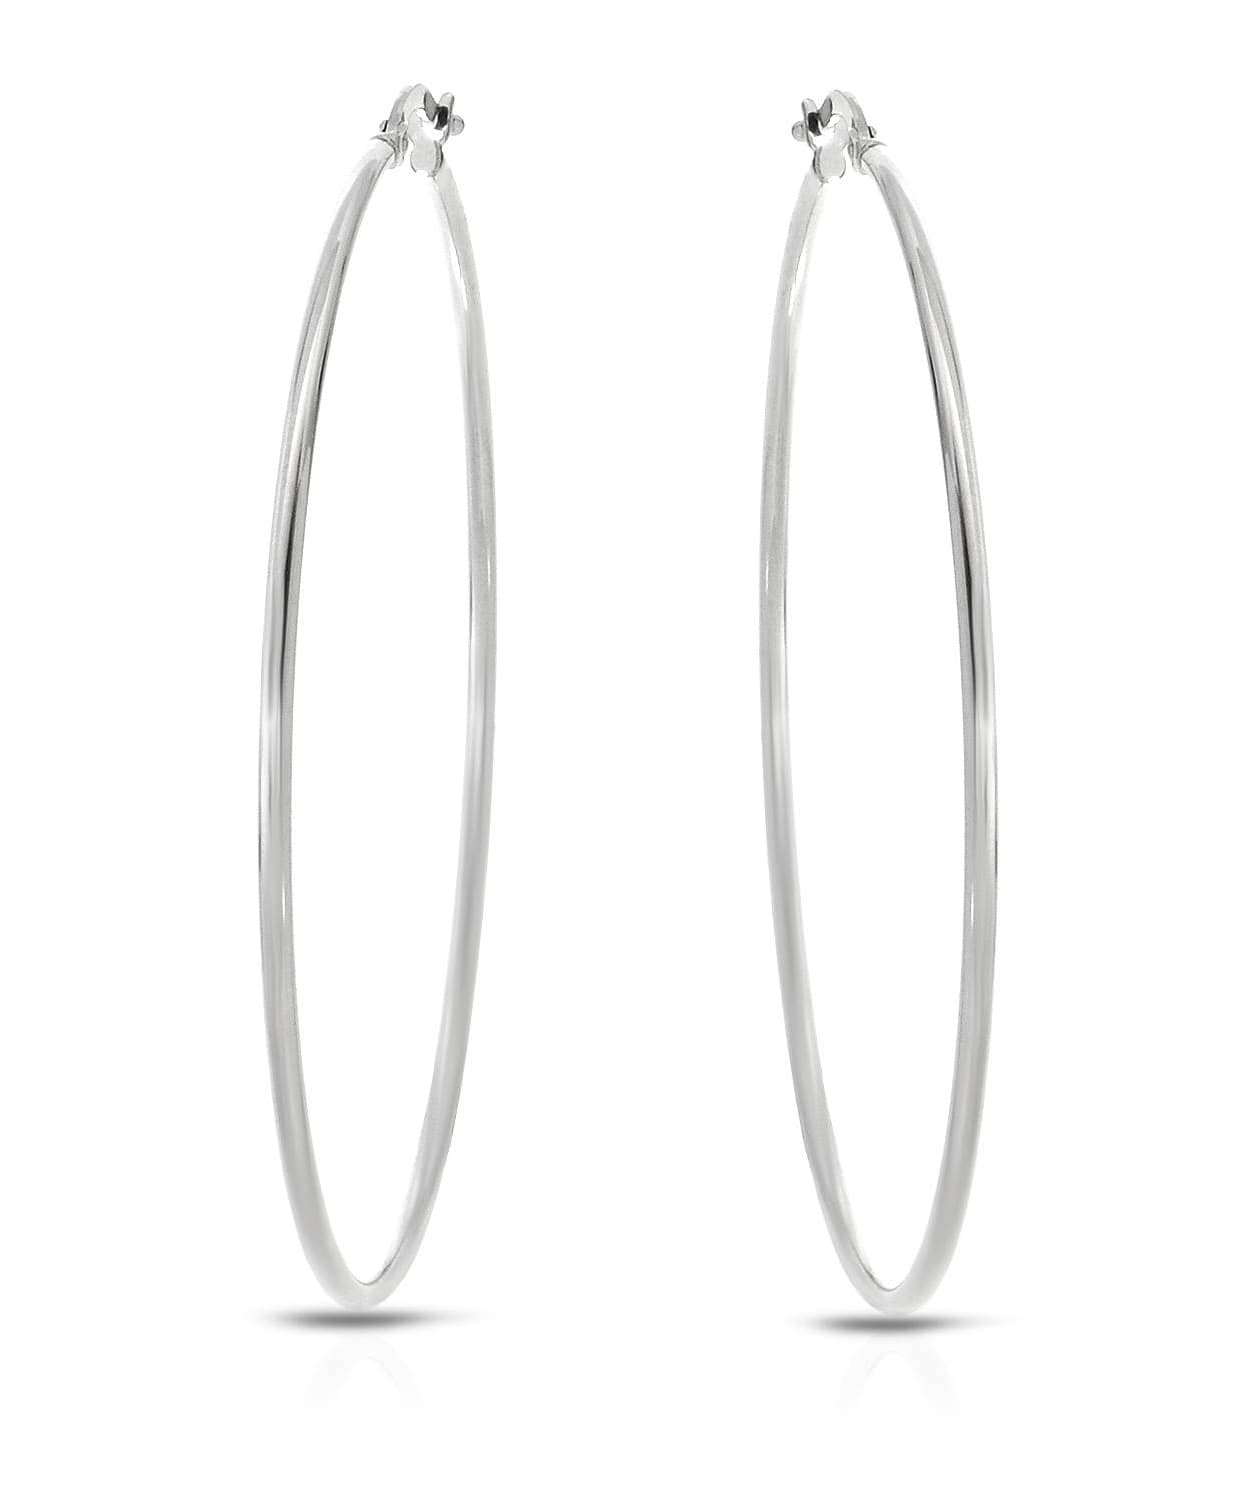 53mm Large 14k White Gold Classic Hoop Earrings View 1